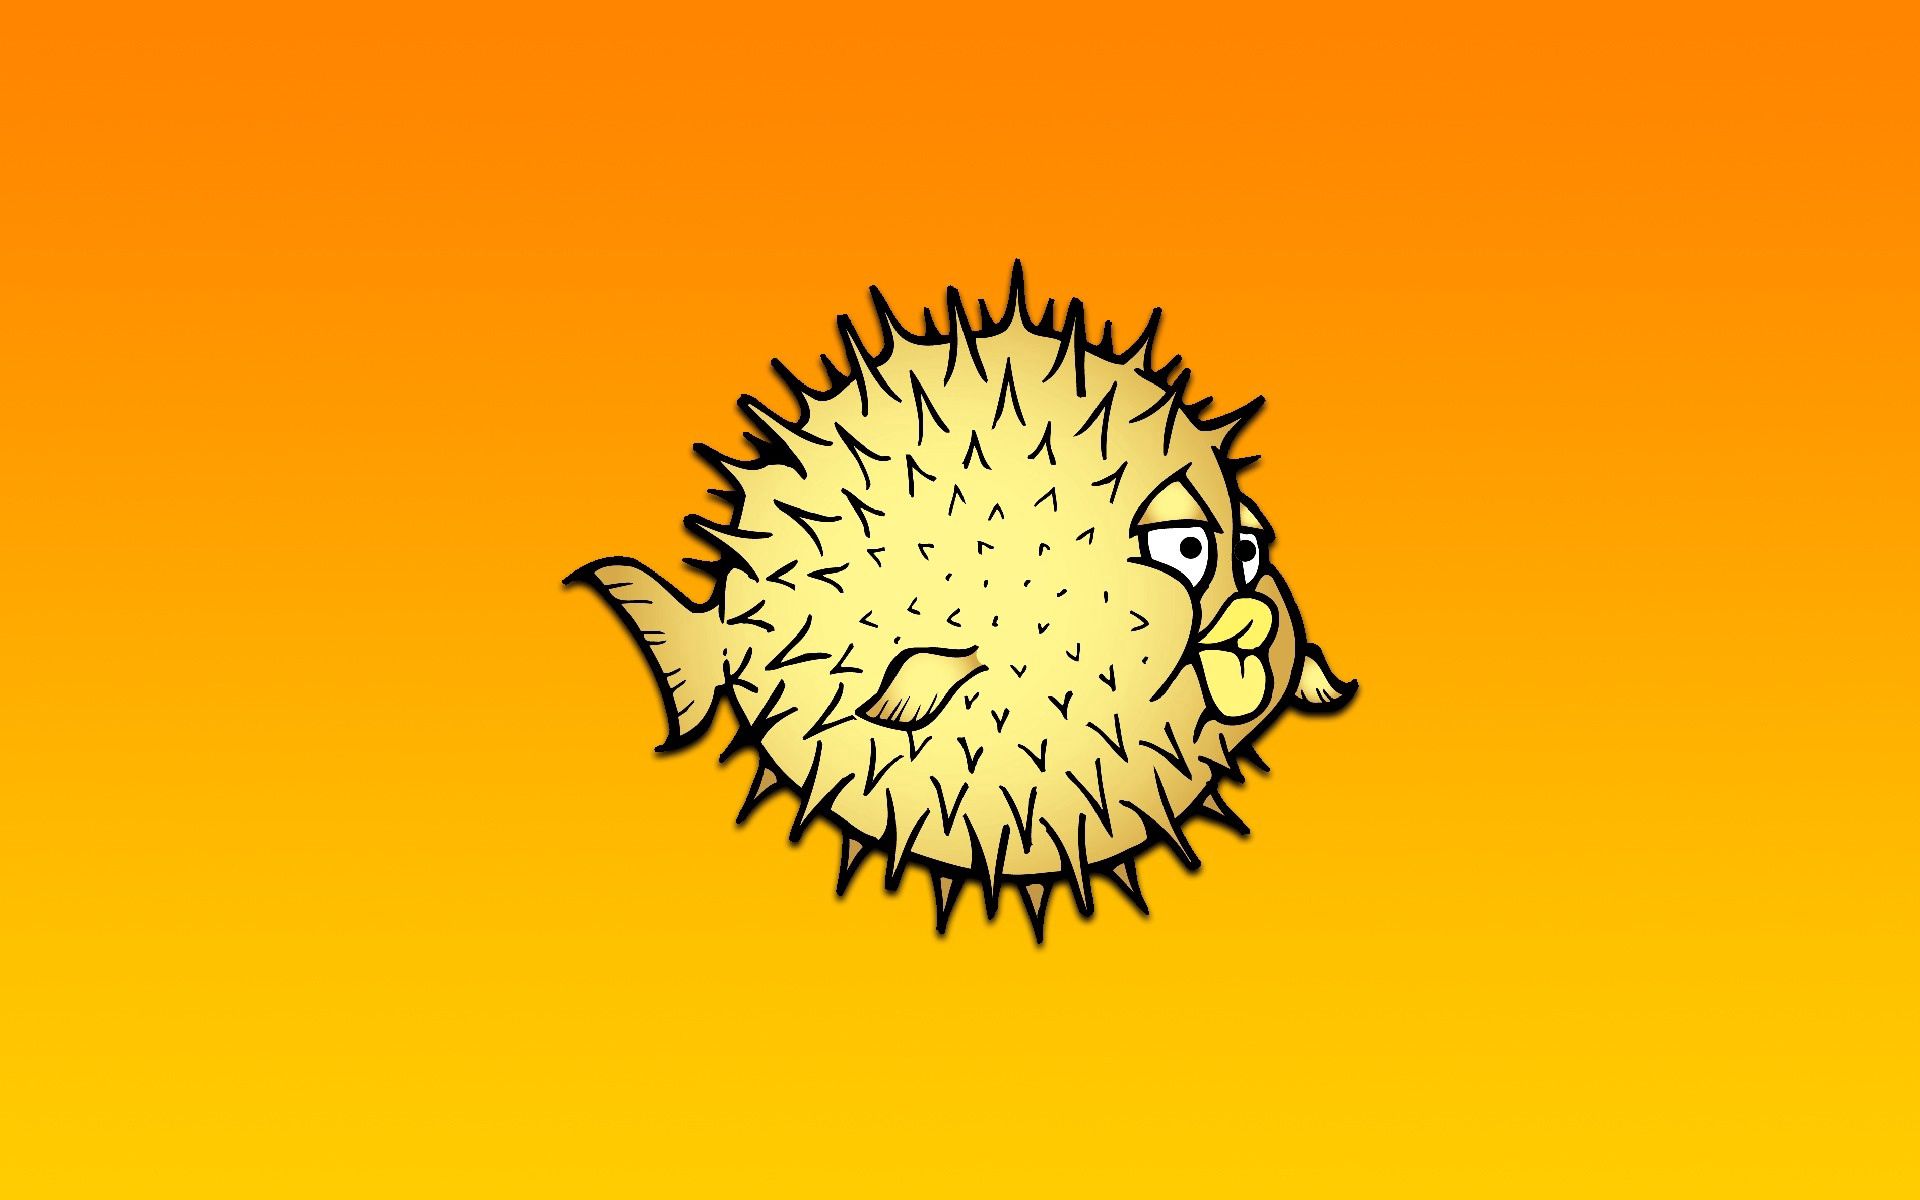 1080p pic background, picture, vector, fish